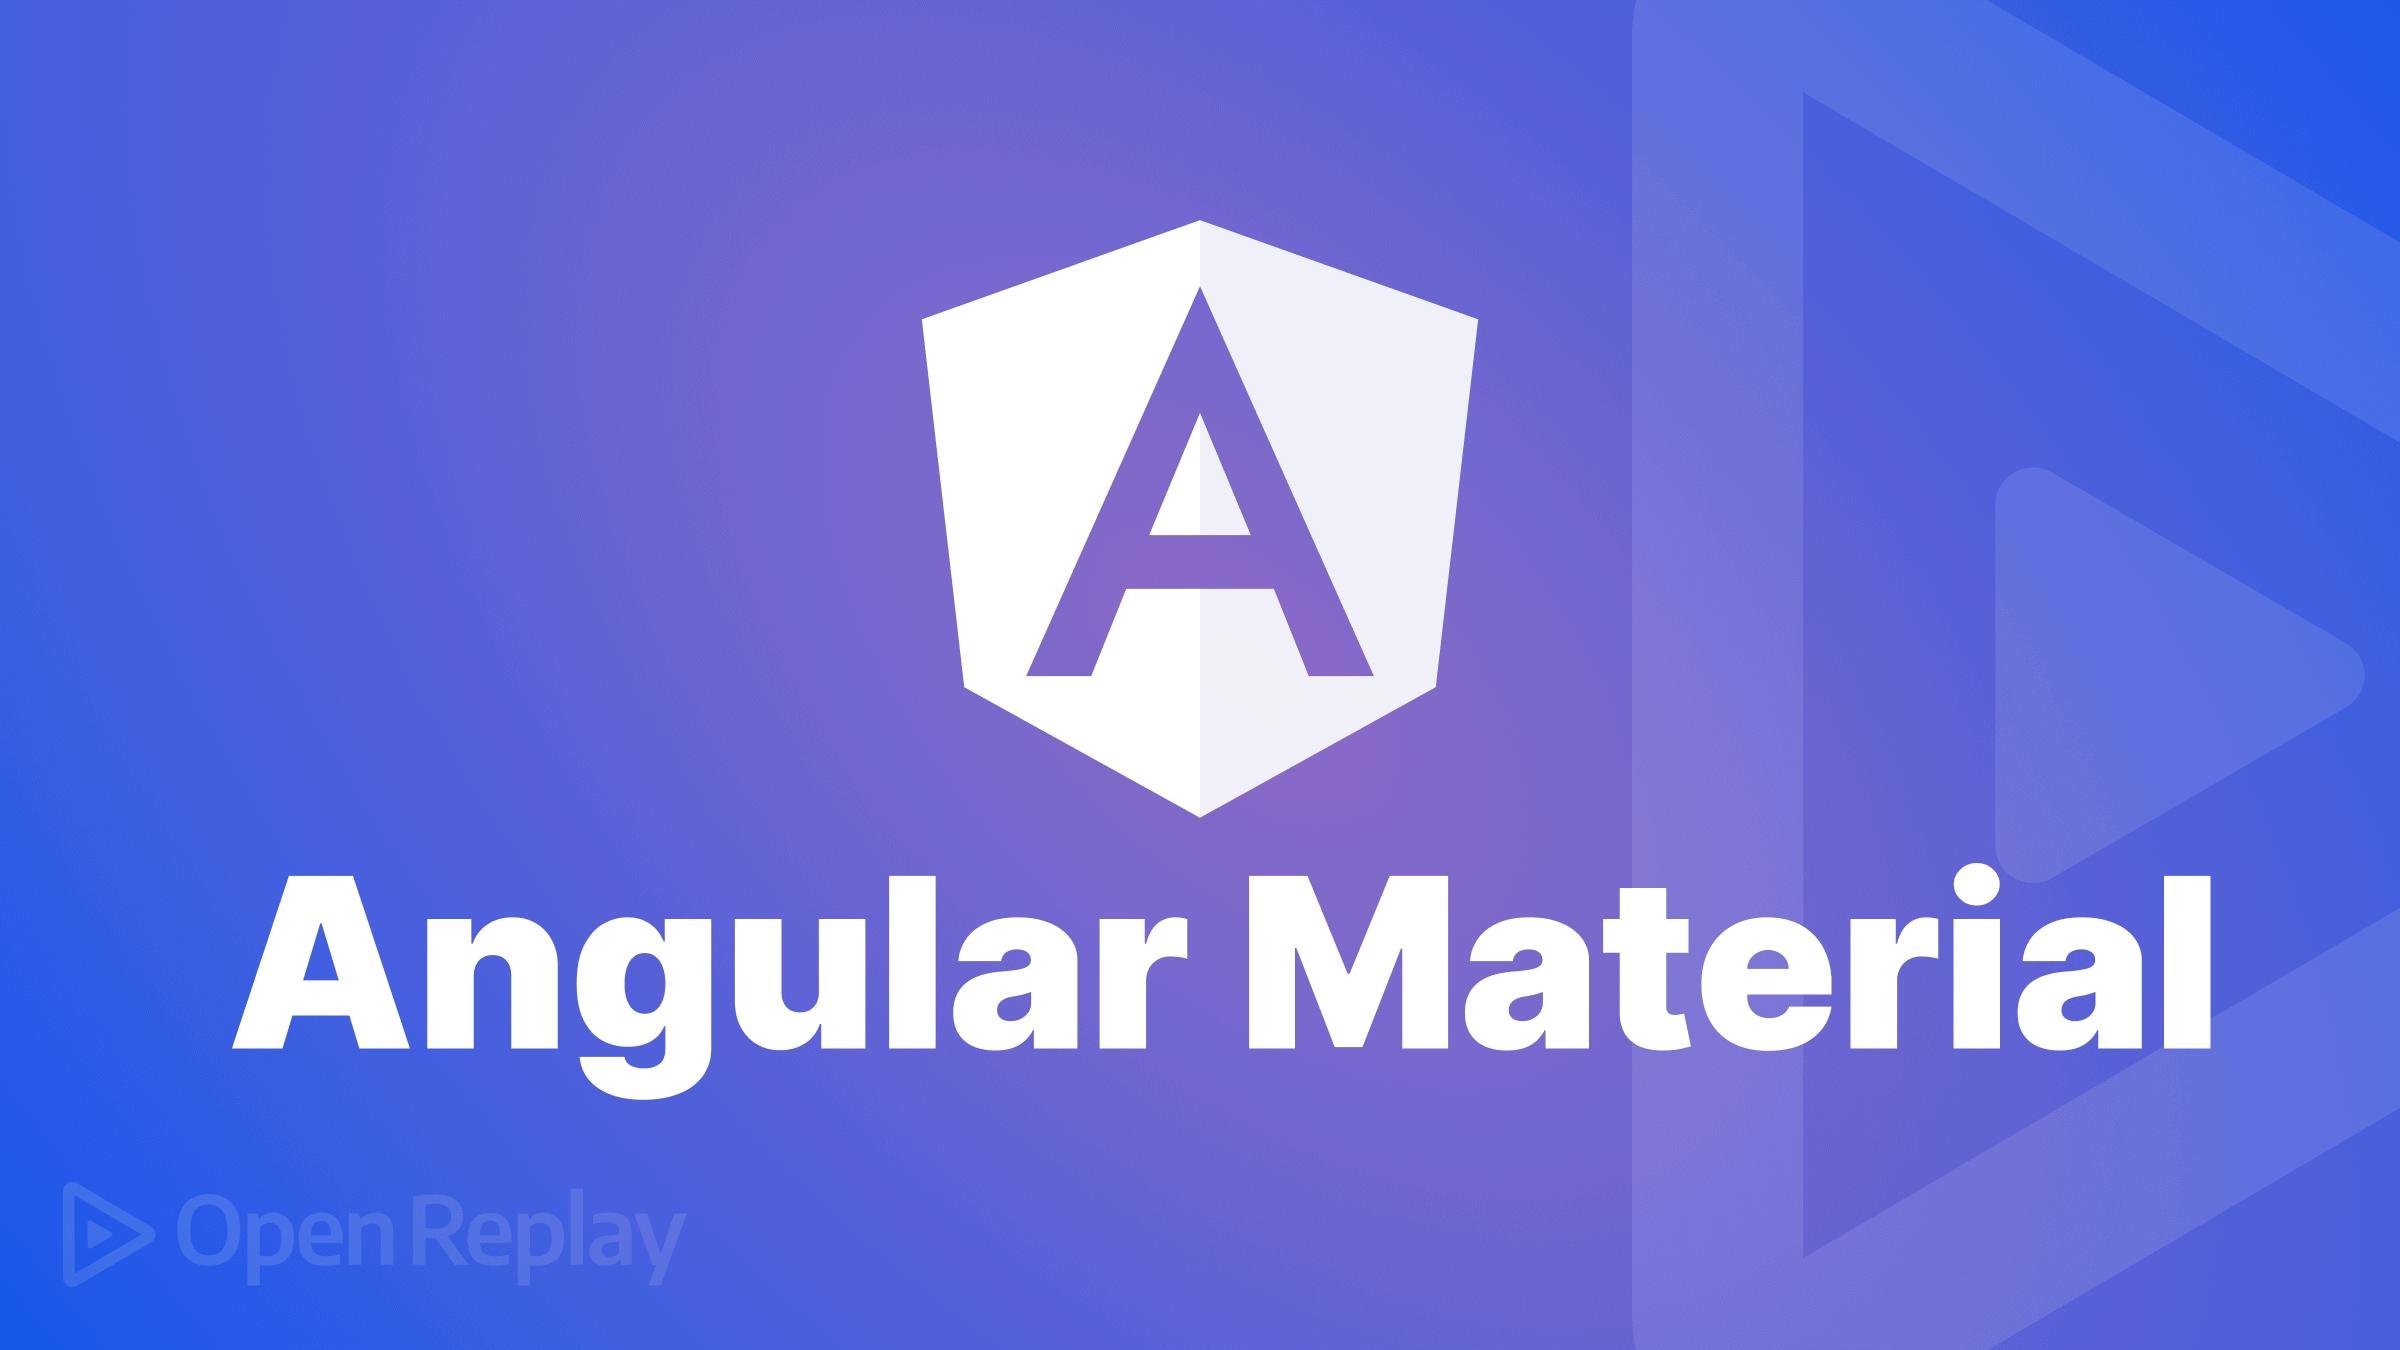 Getting started with Angular Material UI